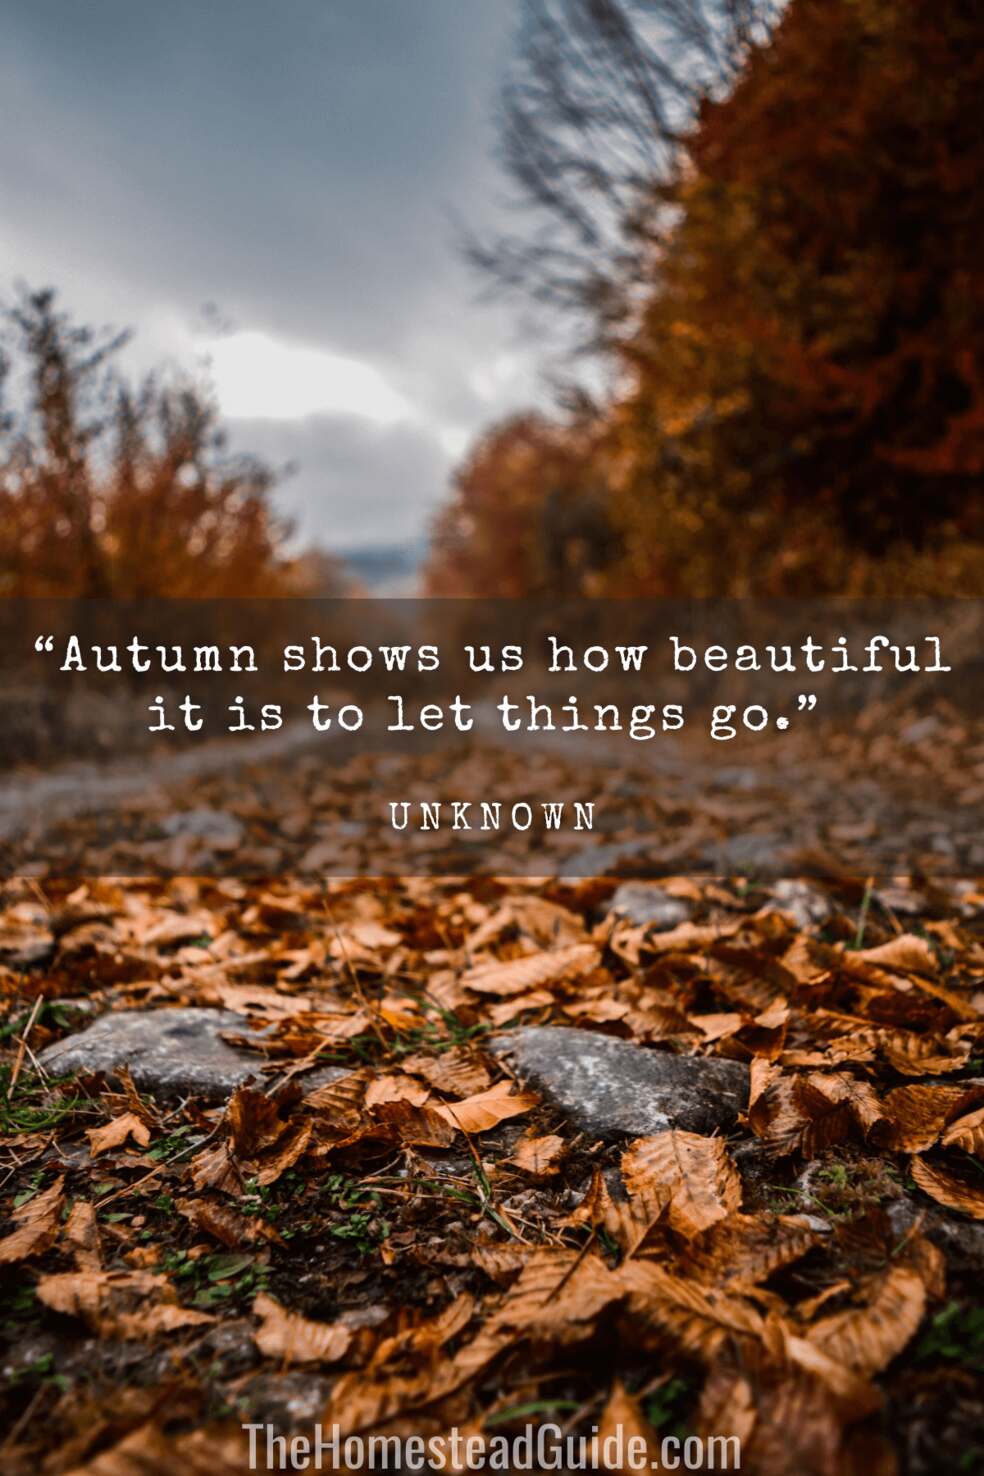 Autumn shows us how beautiful it is to let things go.